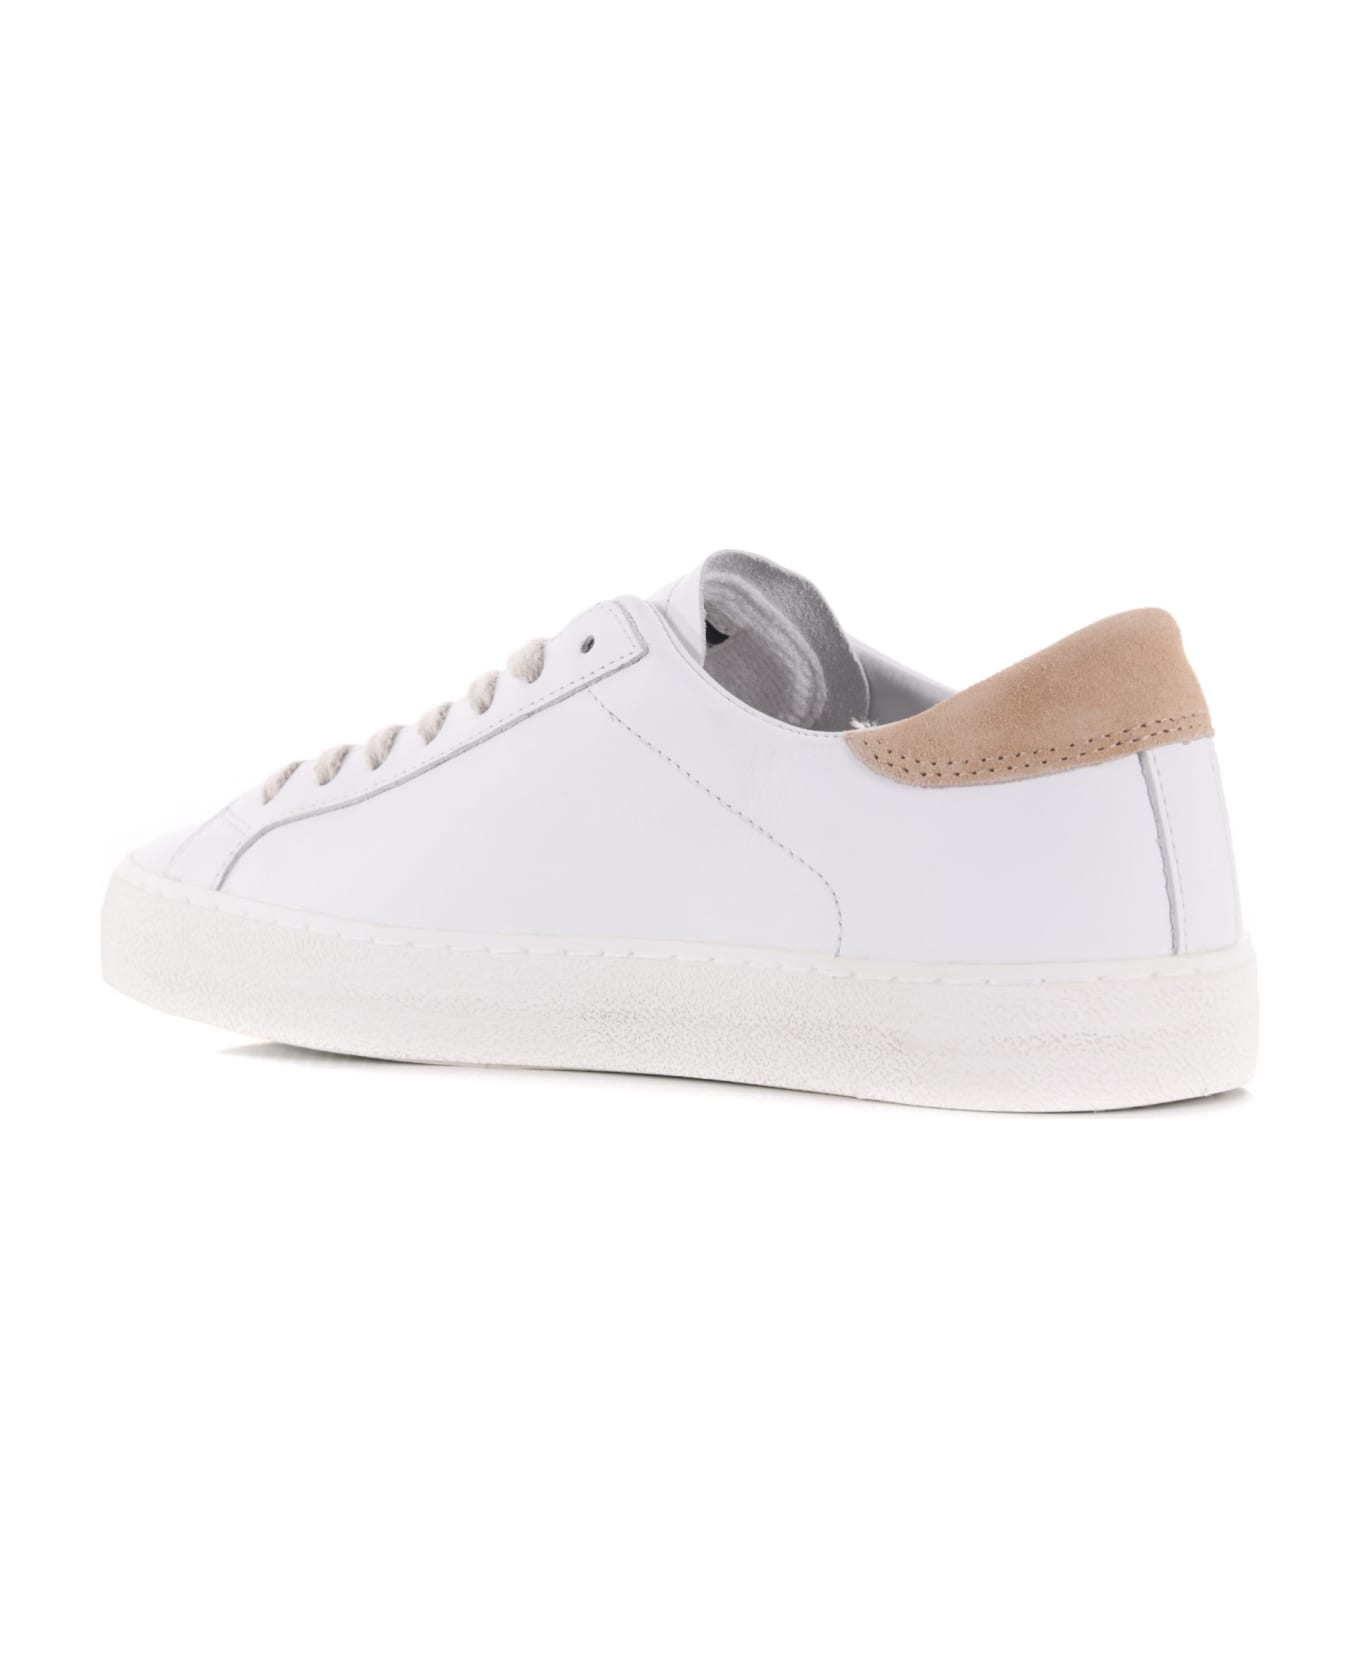 D.A.T.E. Sneakers "hill Low Calf Vintage" In Leather - Bianco/sabbia